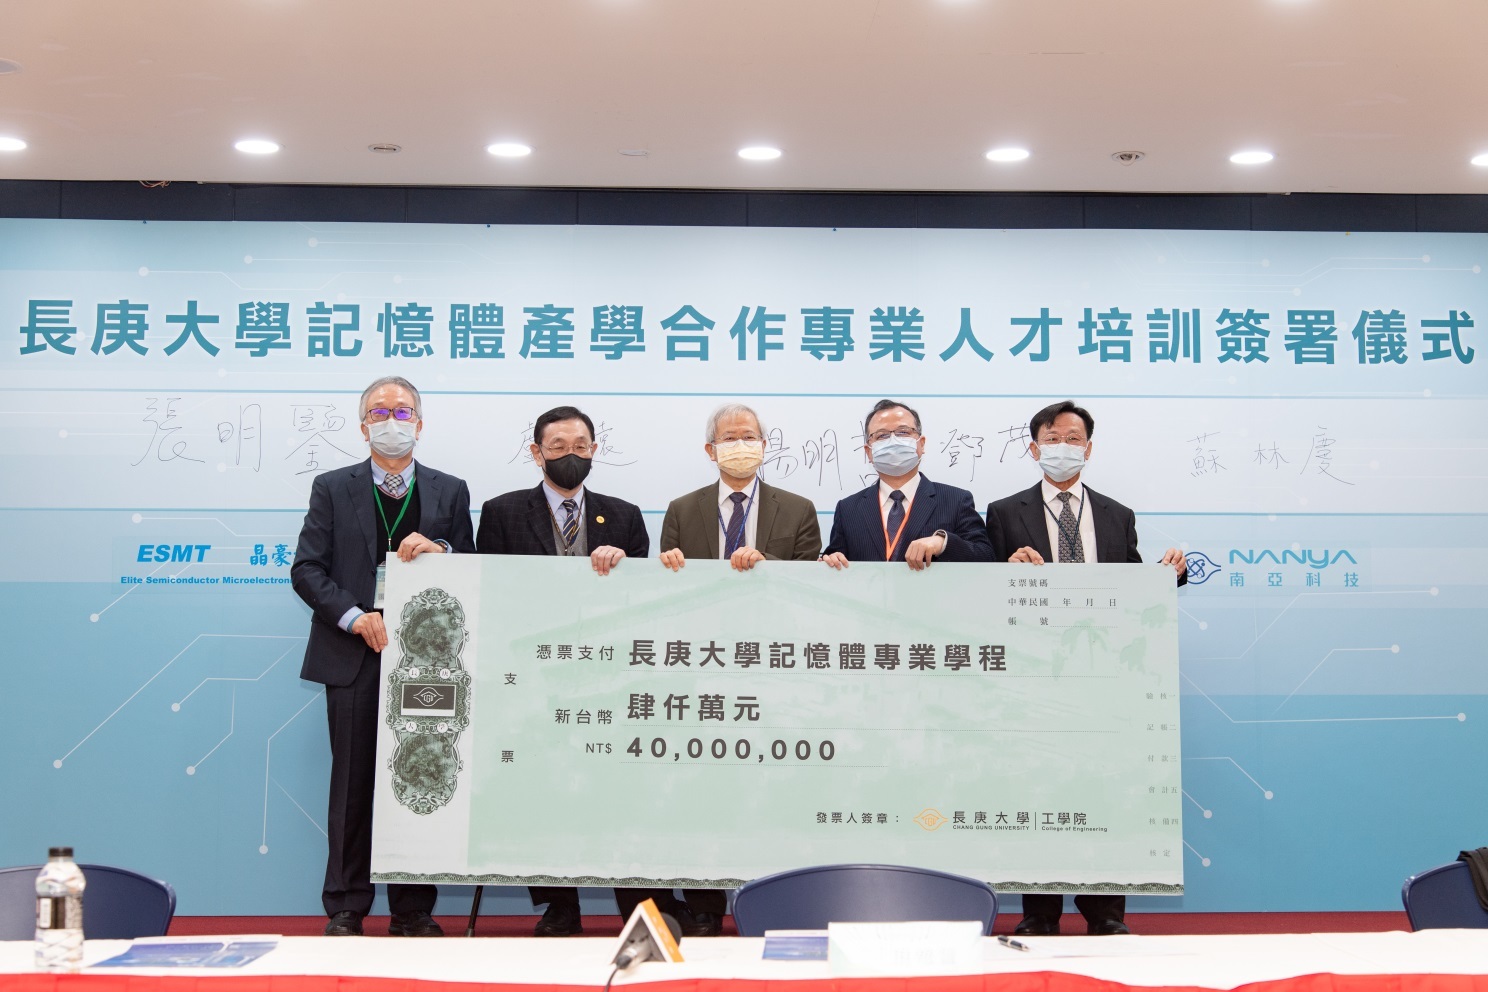 Chang Gung University signed a collaboration contract with Macronix, Nanya Technology, ESMT, and Etron Technology to jointly cultivate the next generation of high-level research and development talents for computer memory.